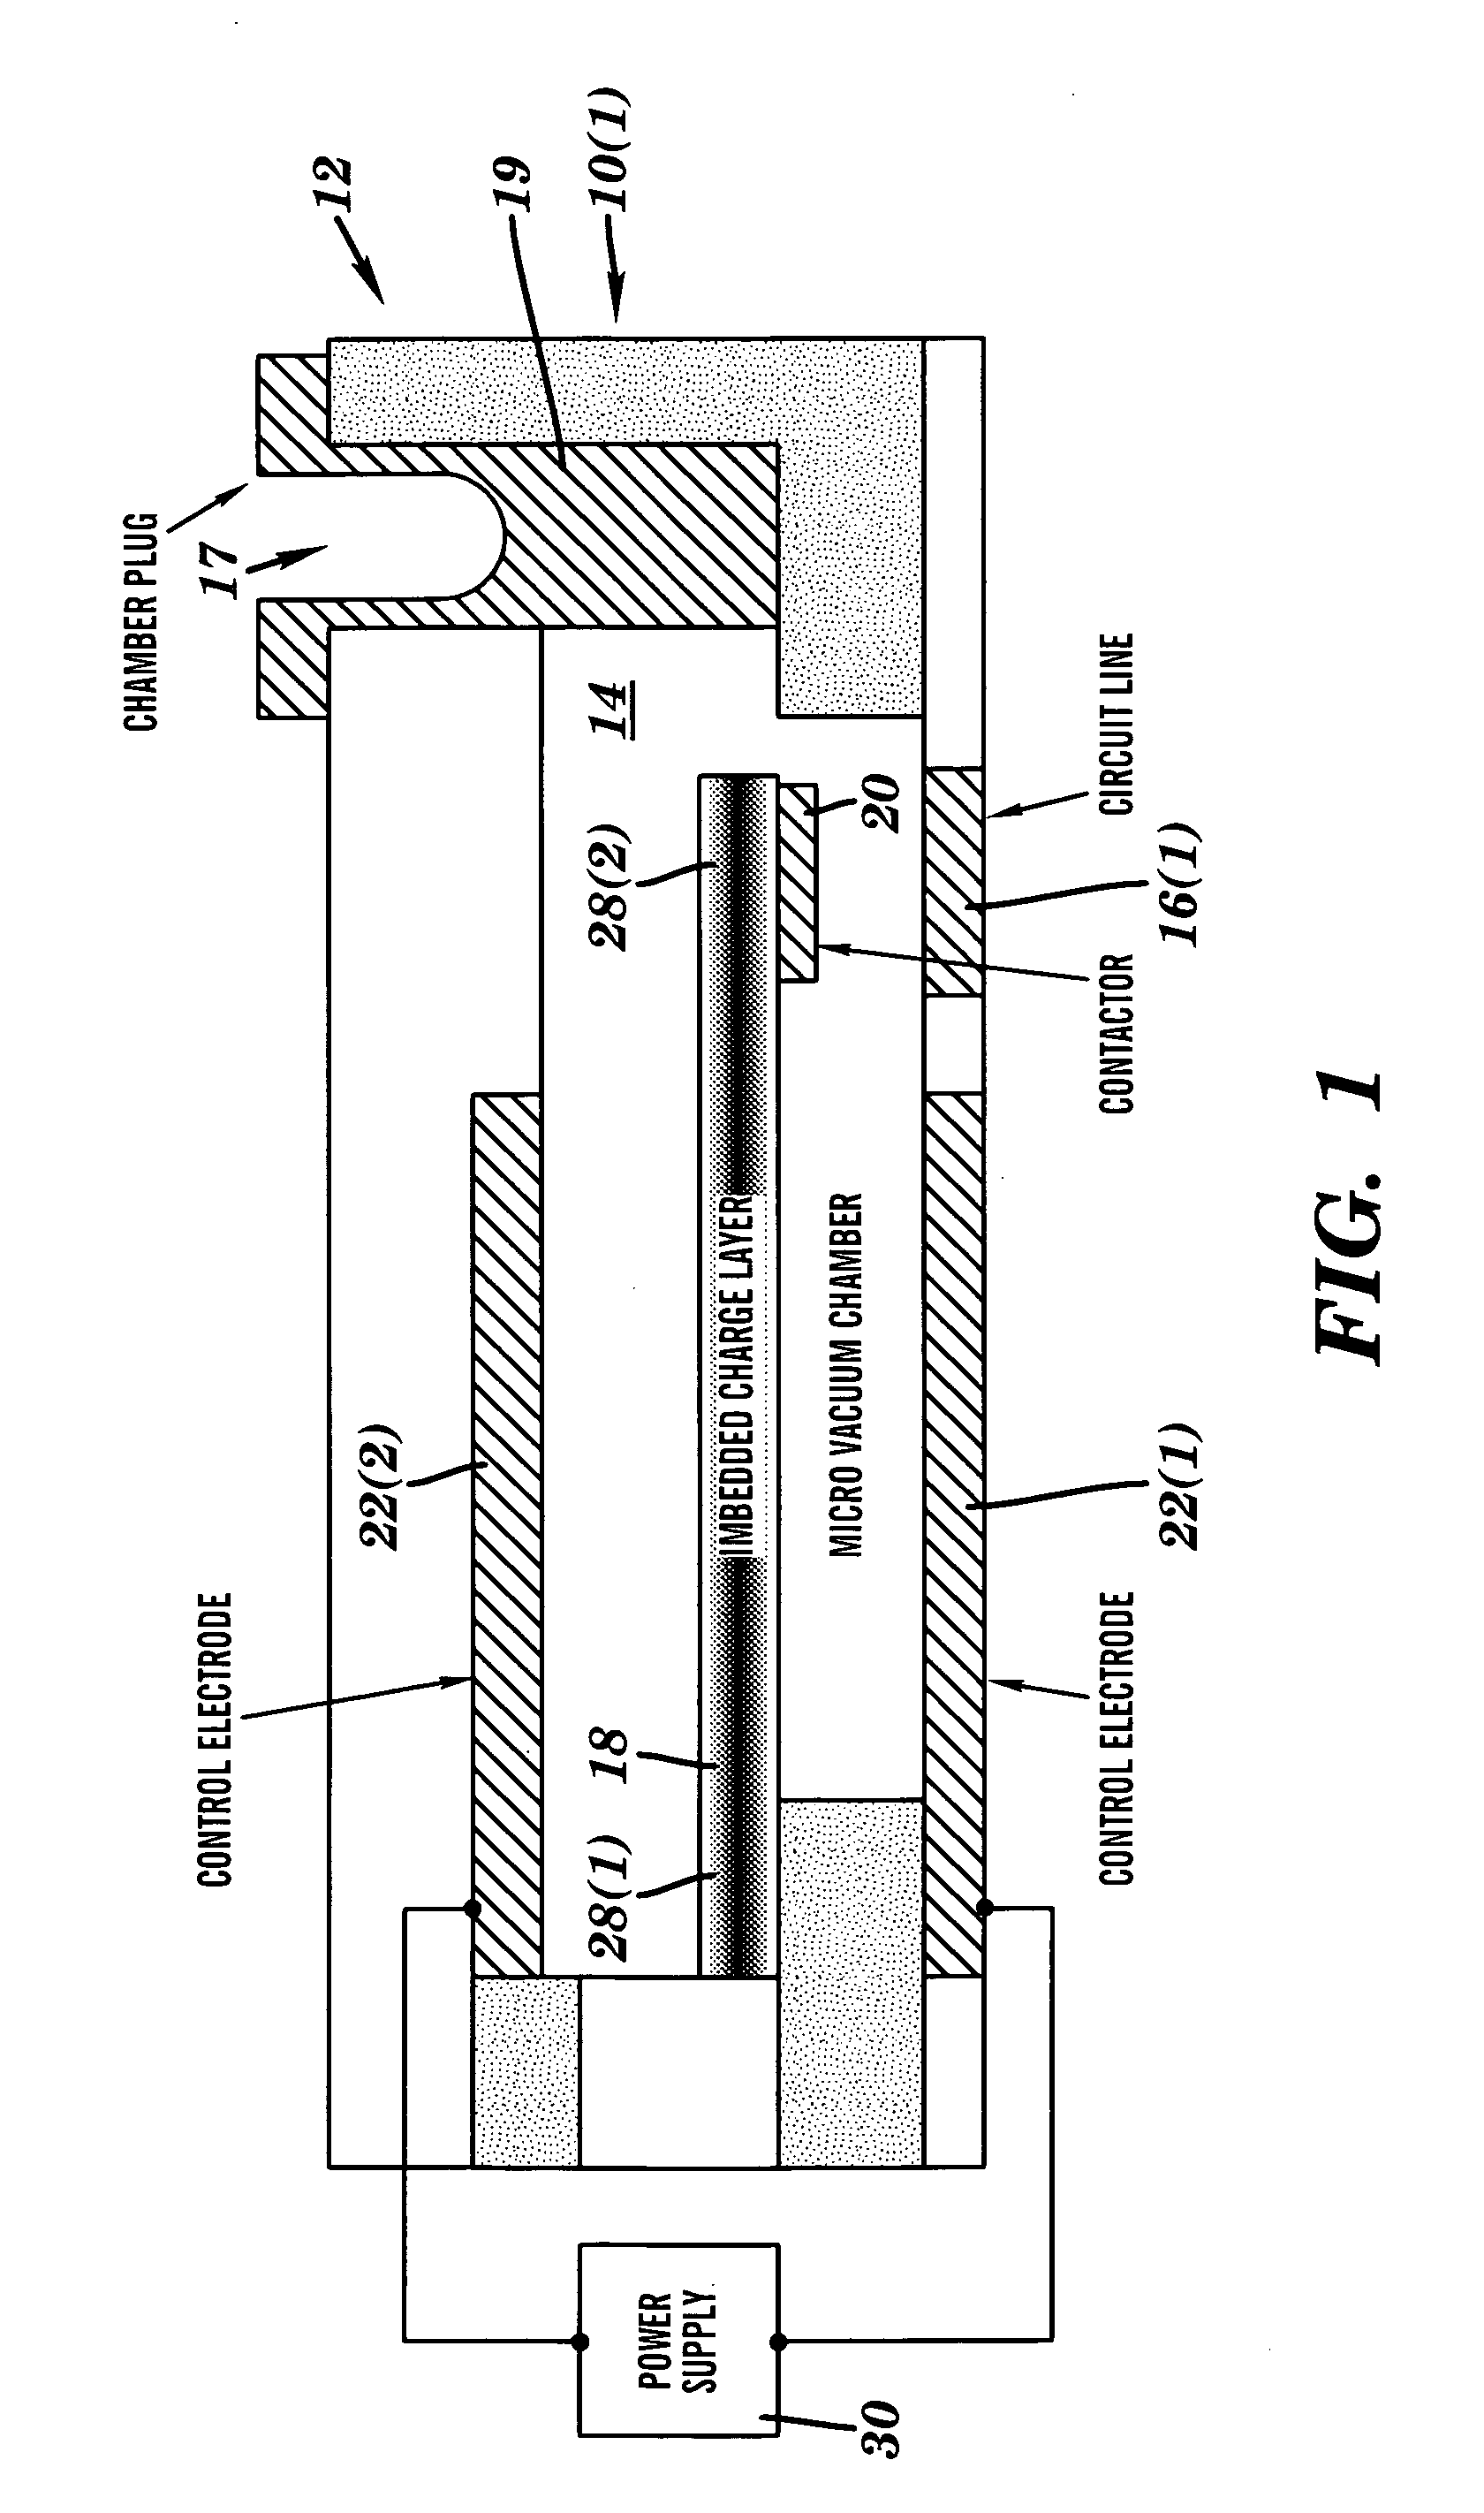 Micro-electro-mechanical switch and a method of using and making thereof